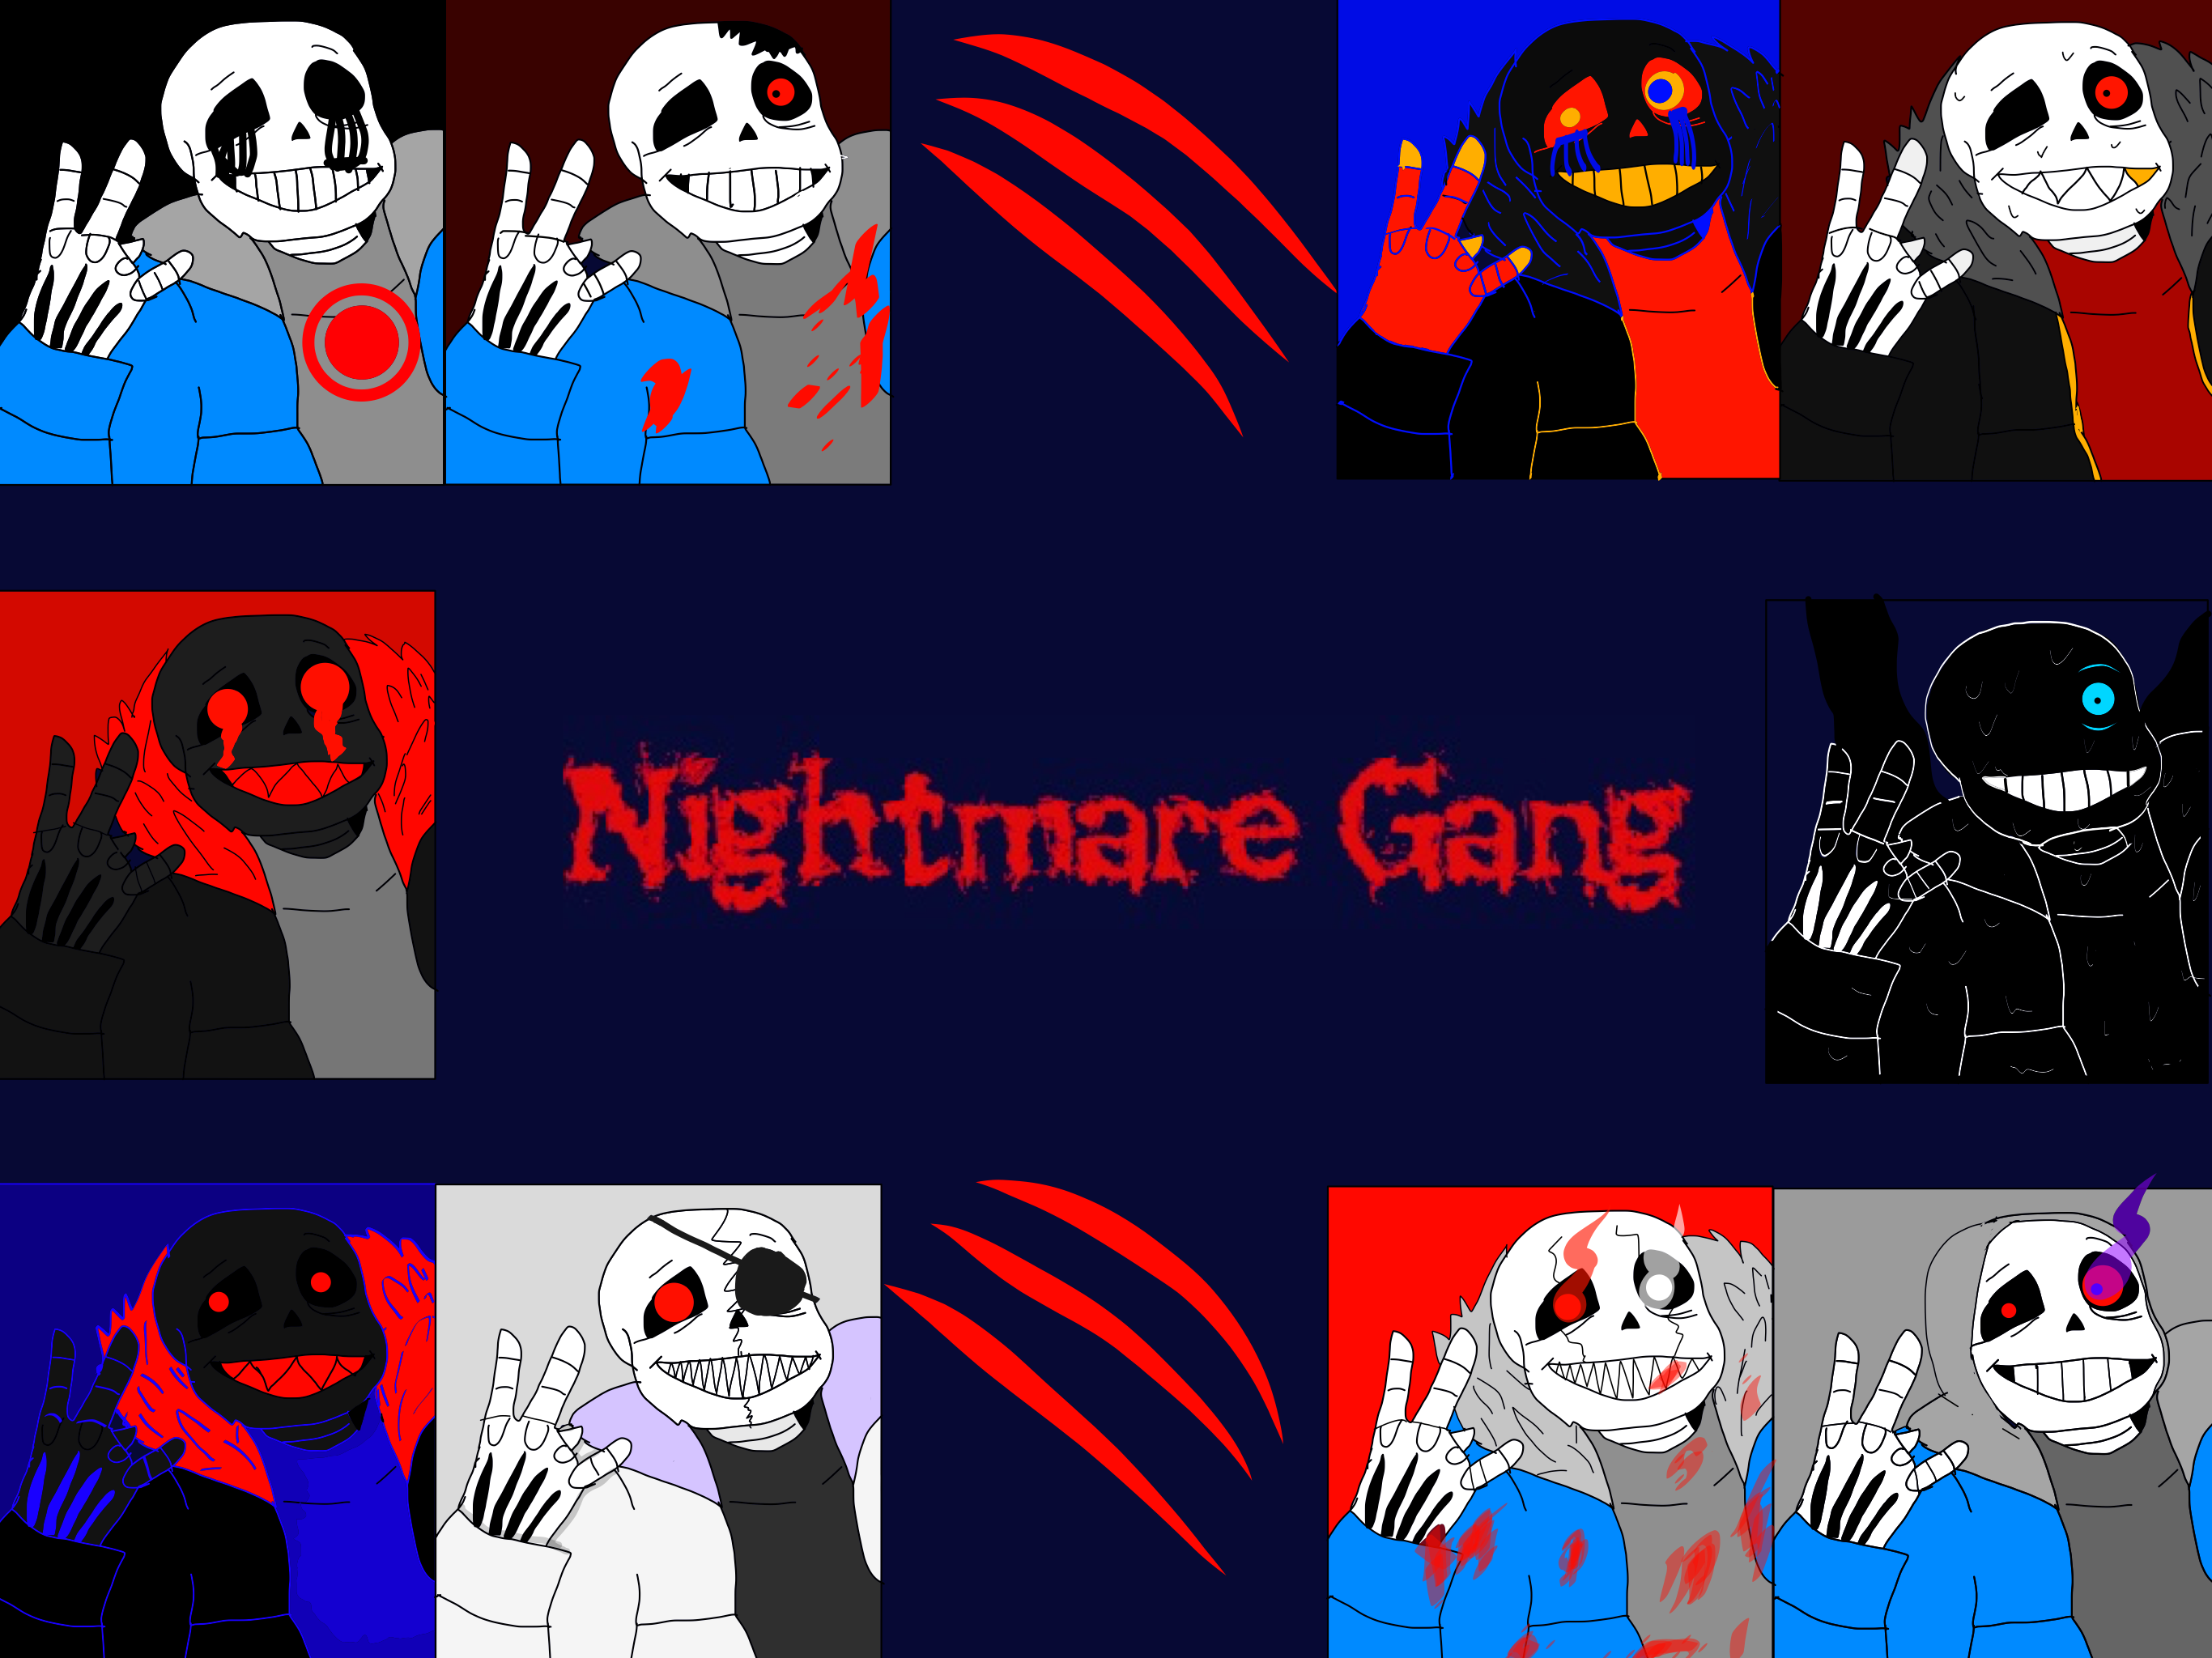 Nightmare!Sans, Smt64 and Friends Wikia